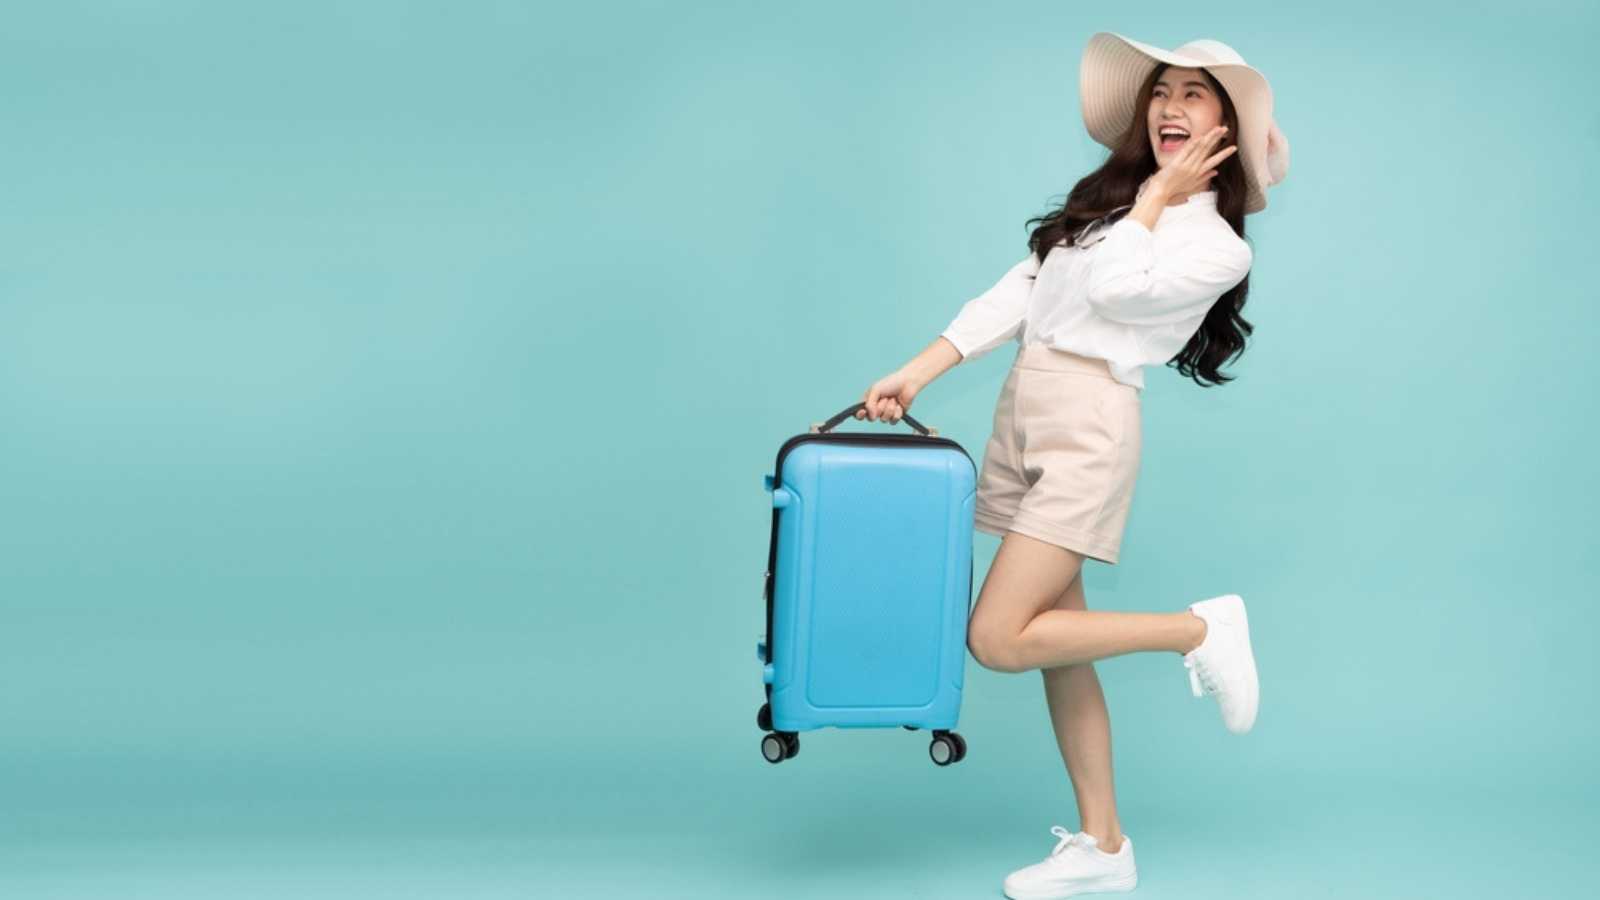 Happy Asian woman traveler standing and holding suitcase isolated on green background, Tourist girl having cheerful holiday trip concept, Full body composition